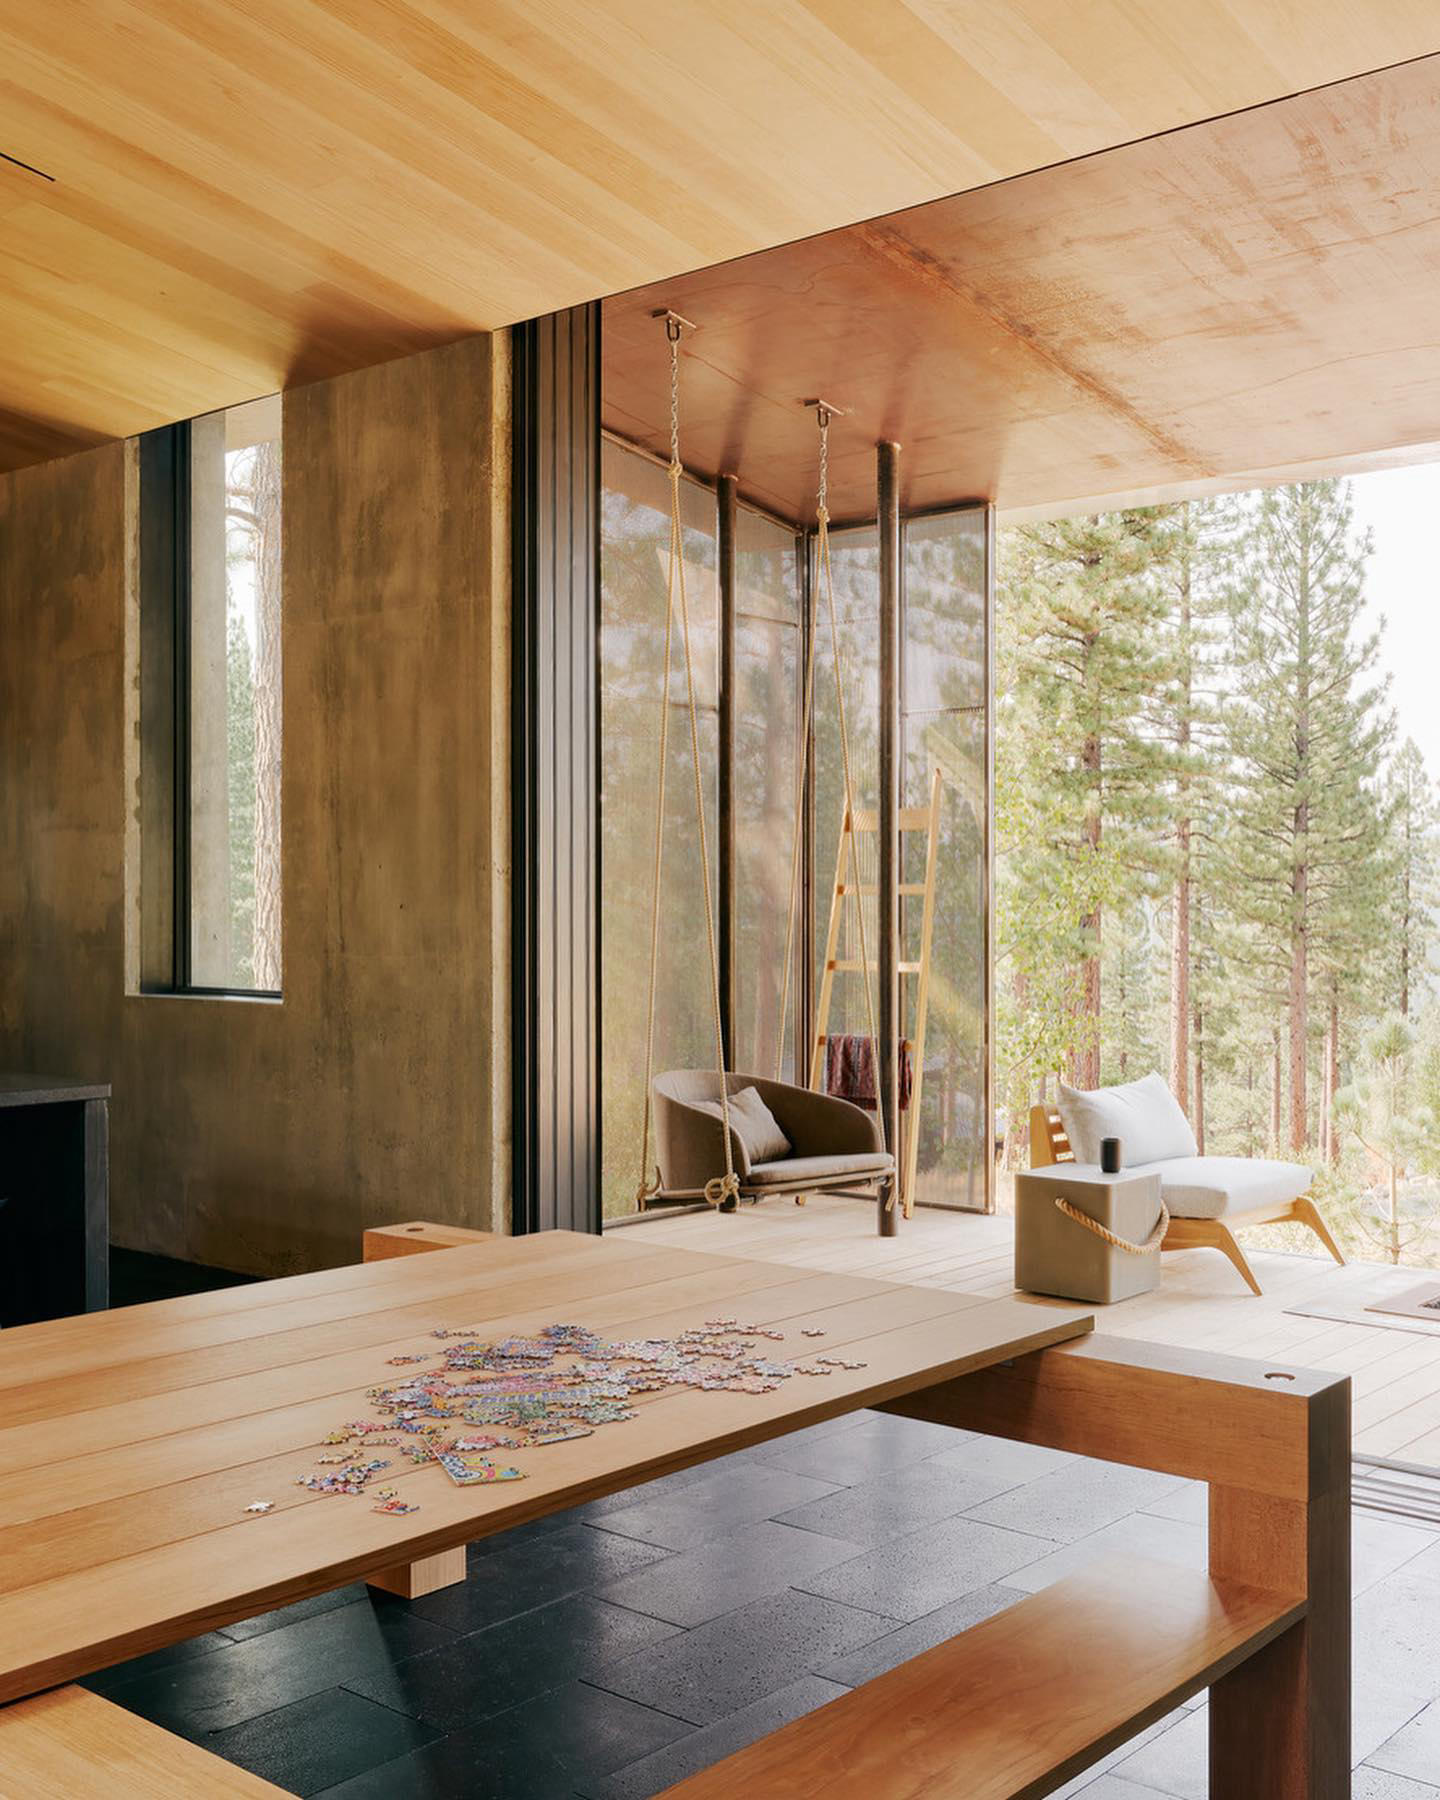 Campout House designed by Faulkner Architects #faulknerarchitects, located in #Tahoe, #California an